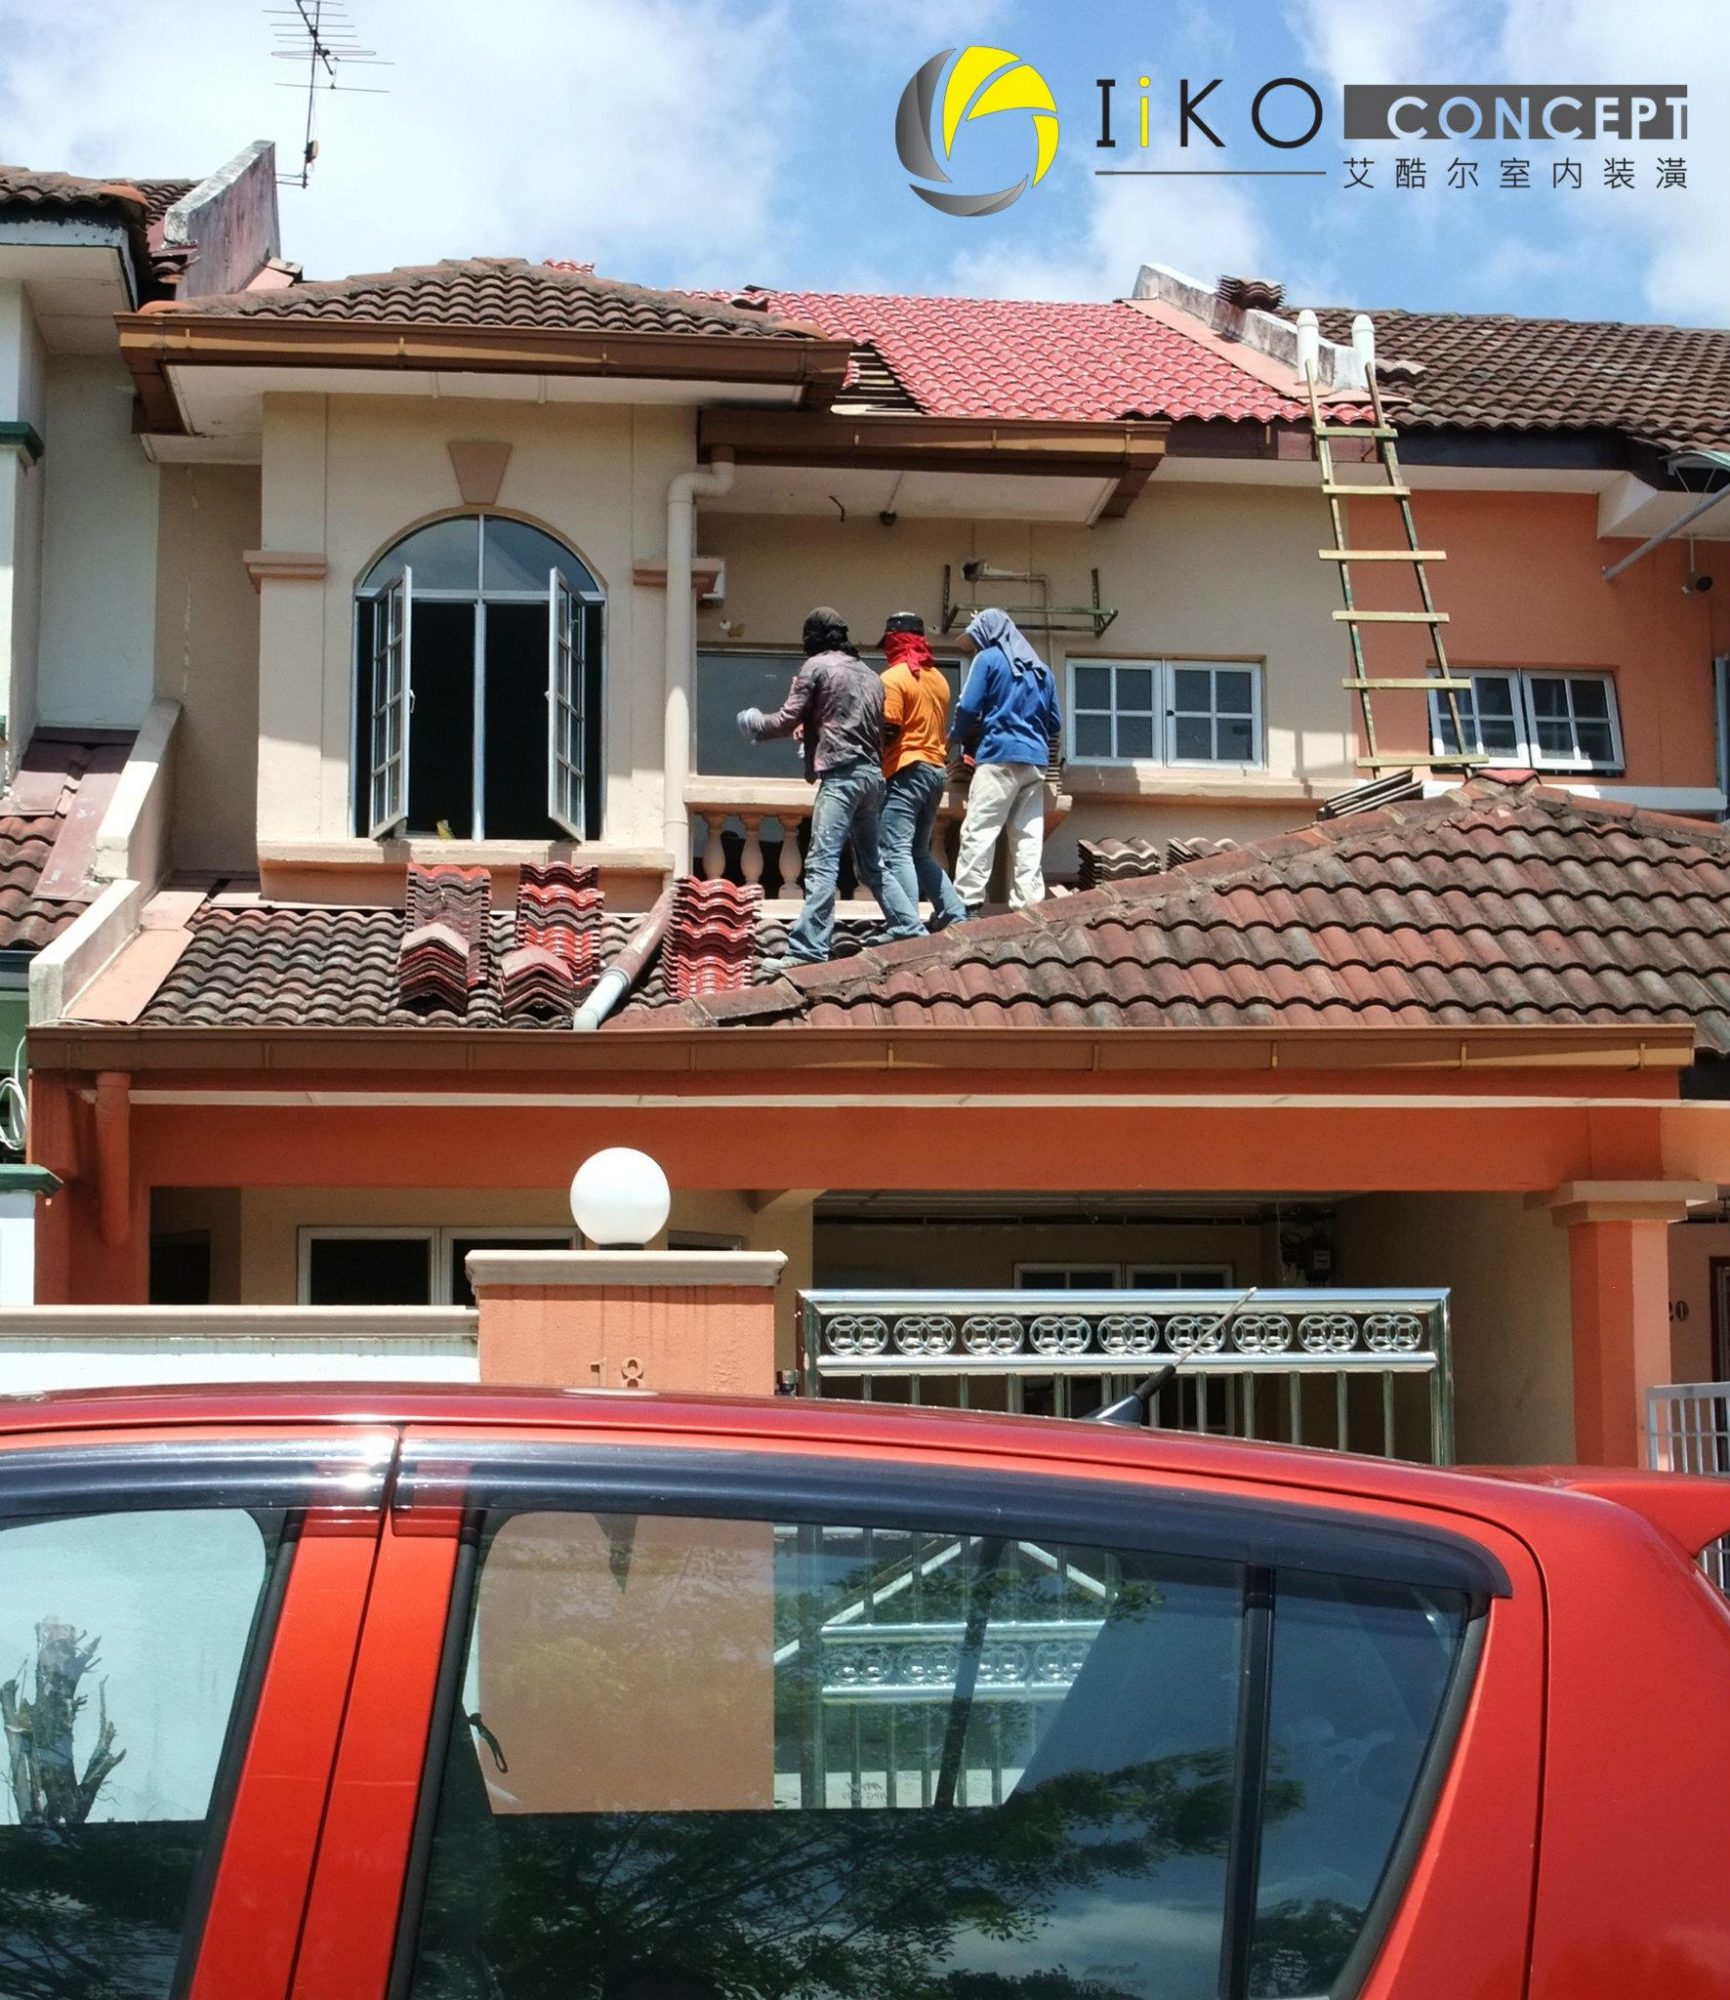 Roofing repairs in progress. Photo by IIKO Concept. Source. 